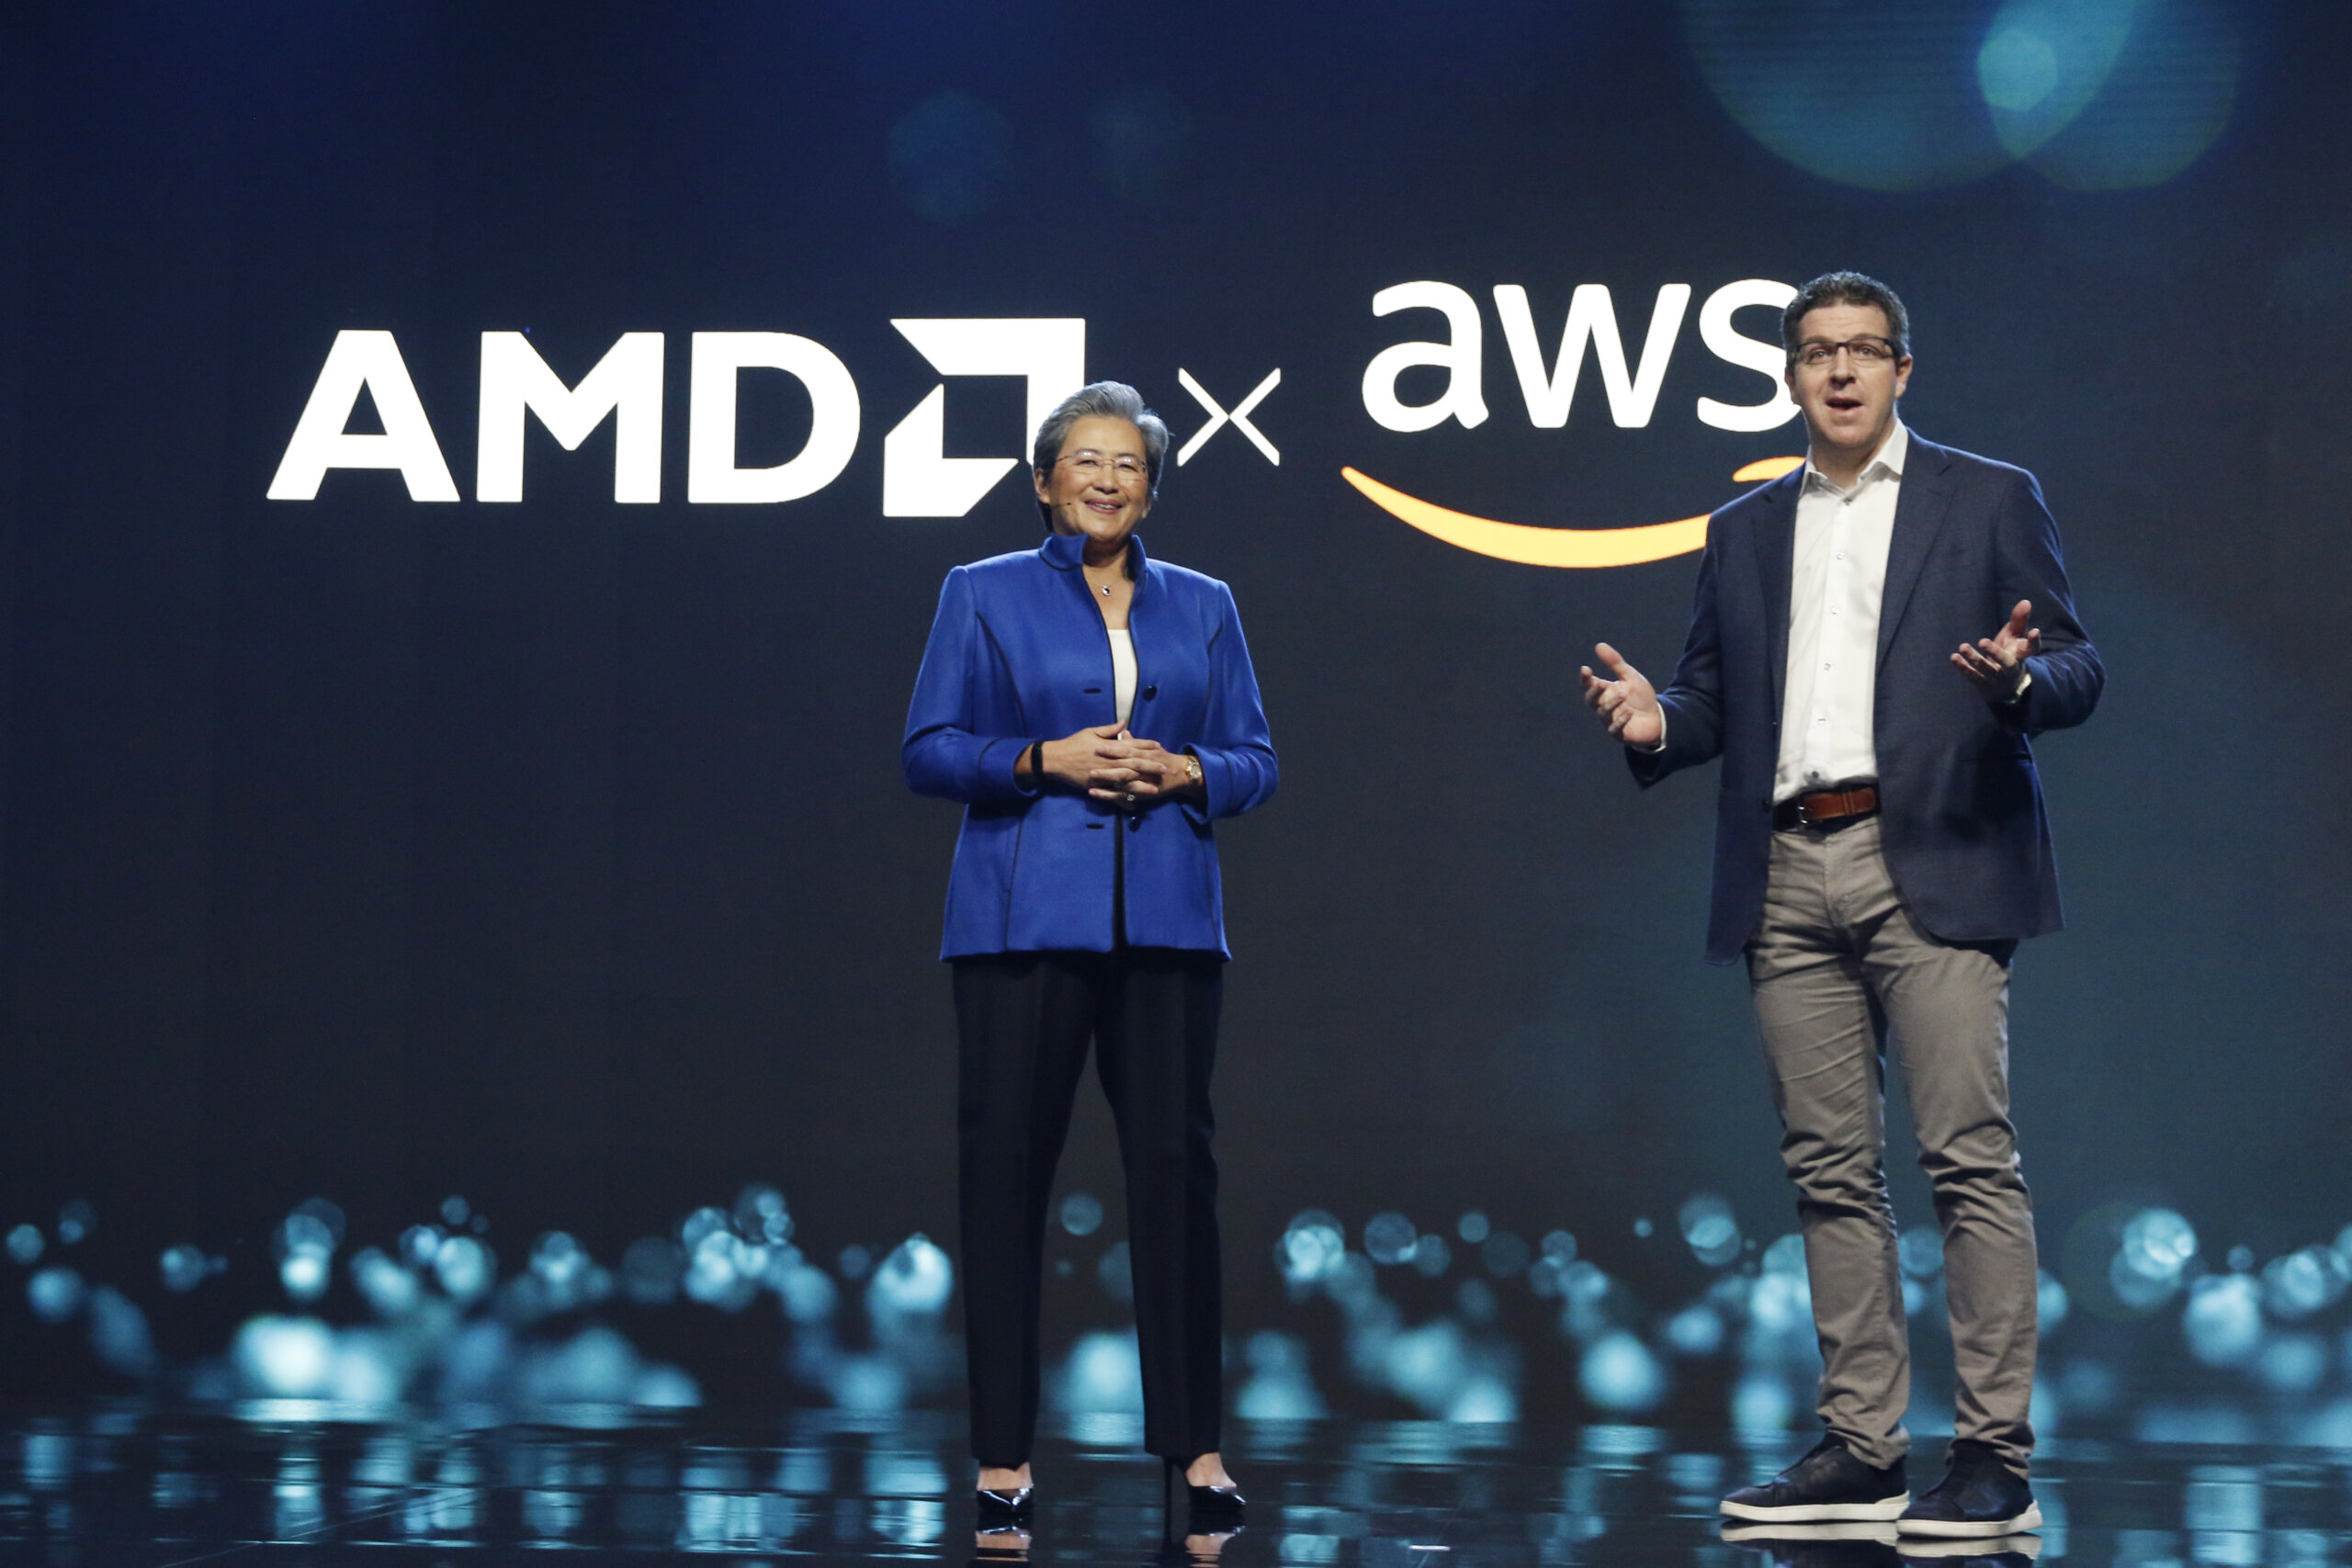 AMD vs Nvidia - AWS is considering using AMD's new AI chips